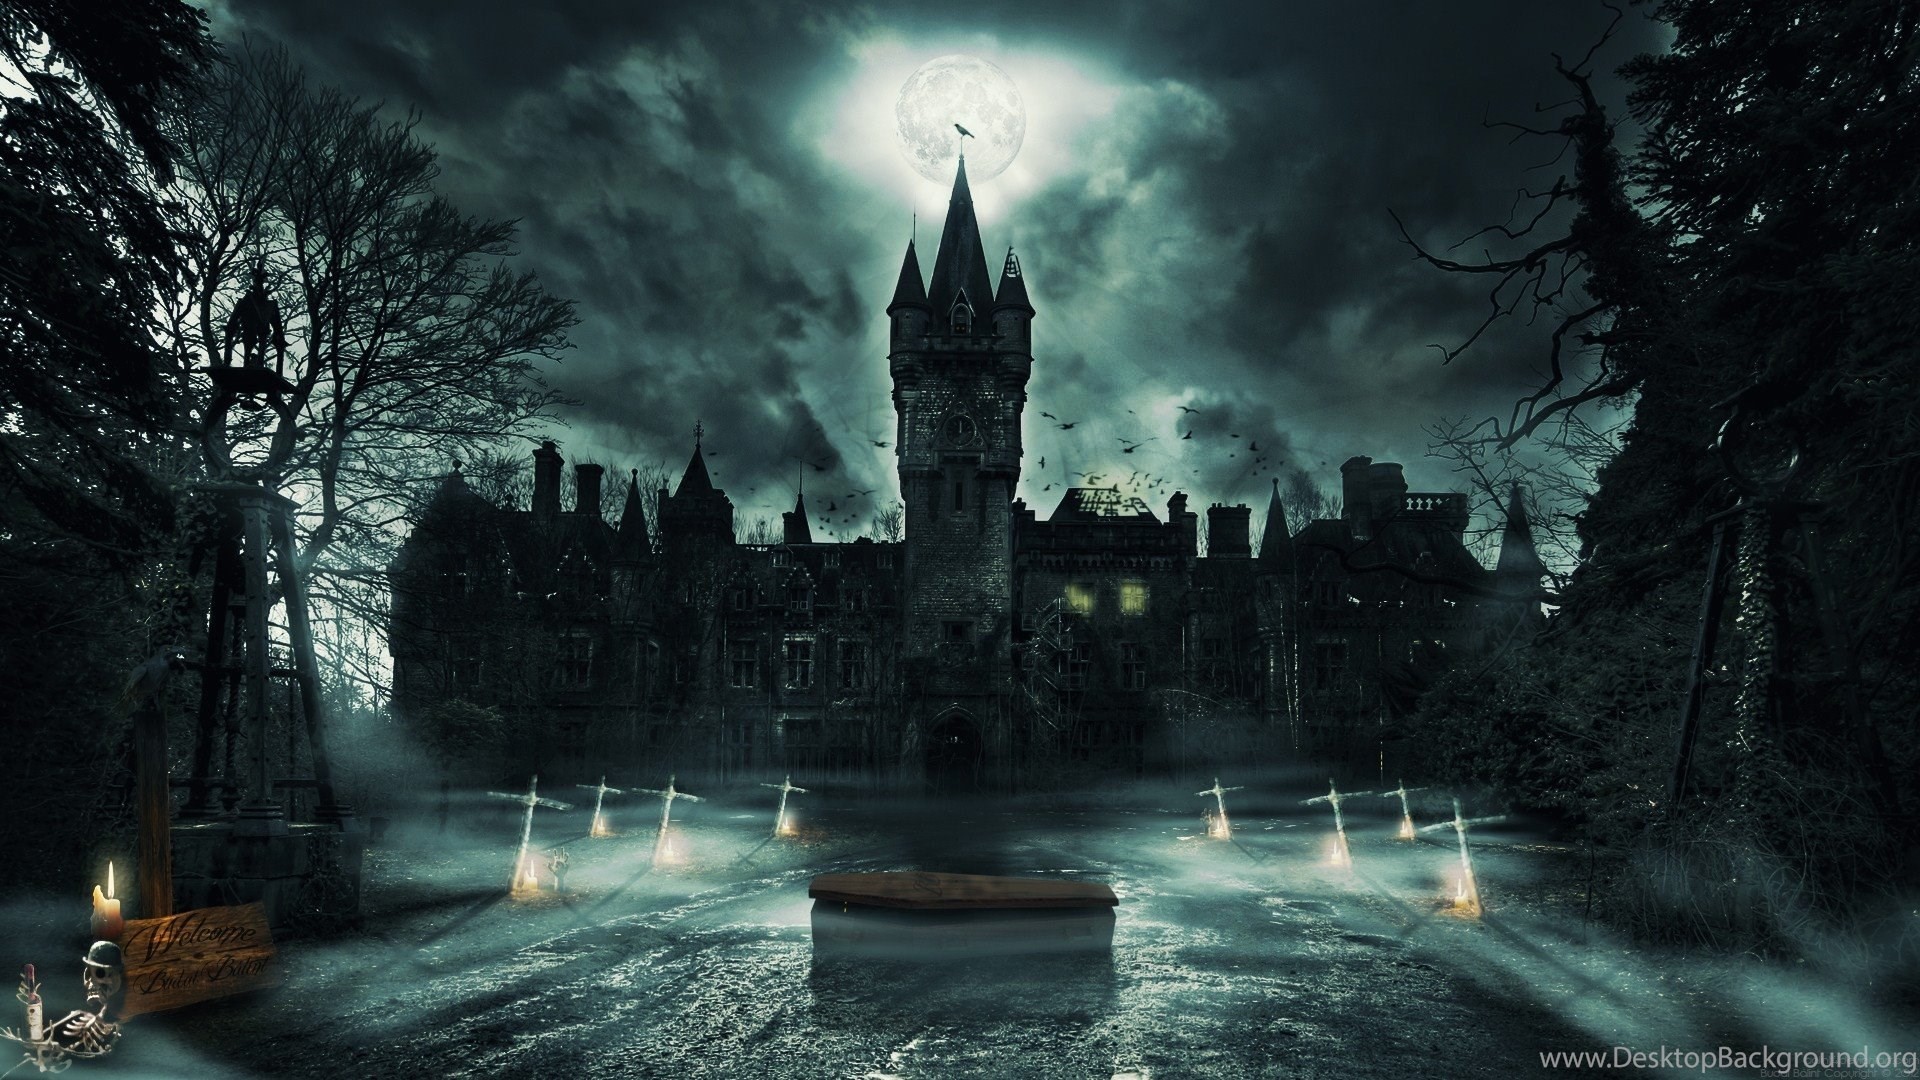 1920x1080 High Resolution Ghost Castle Wallpapers Full Size SiWallpaperHD 17872